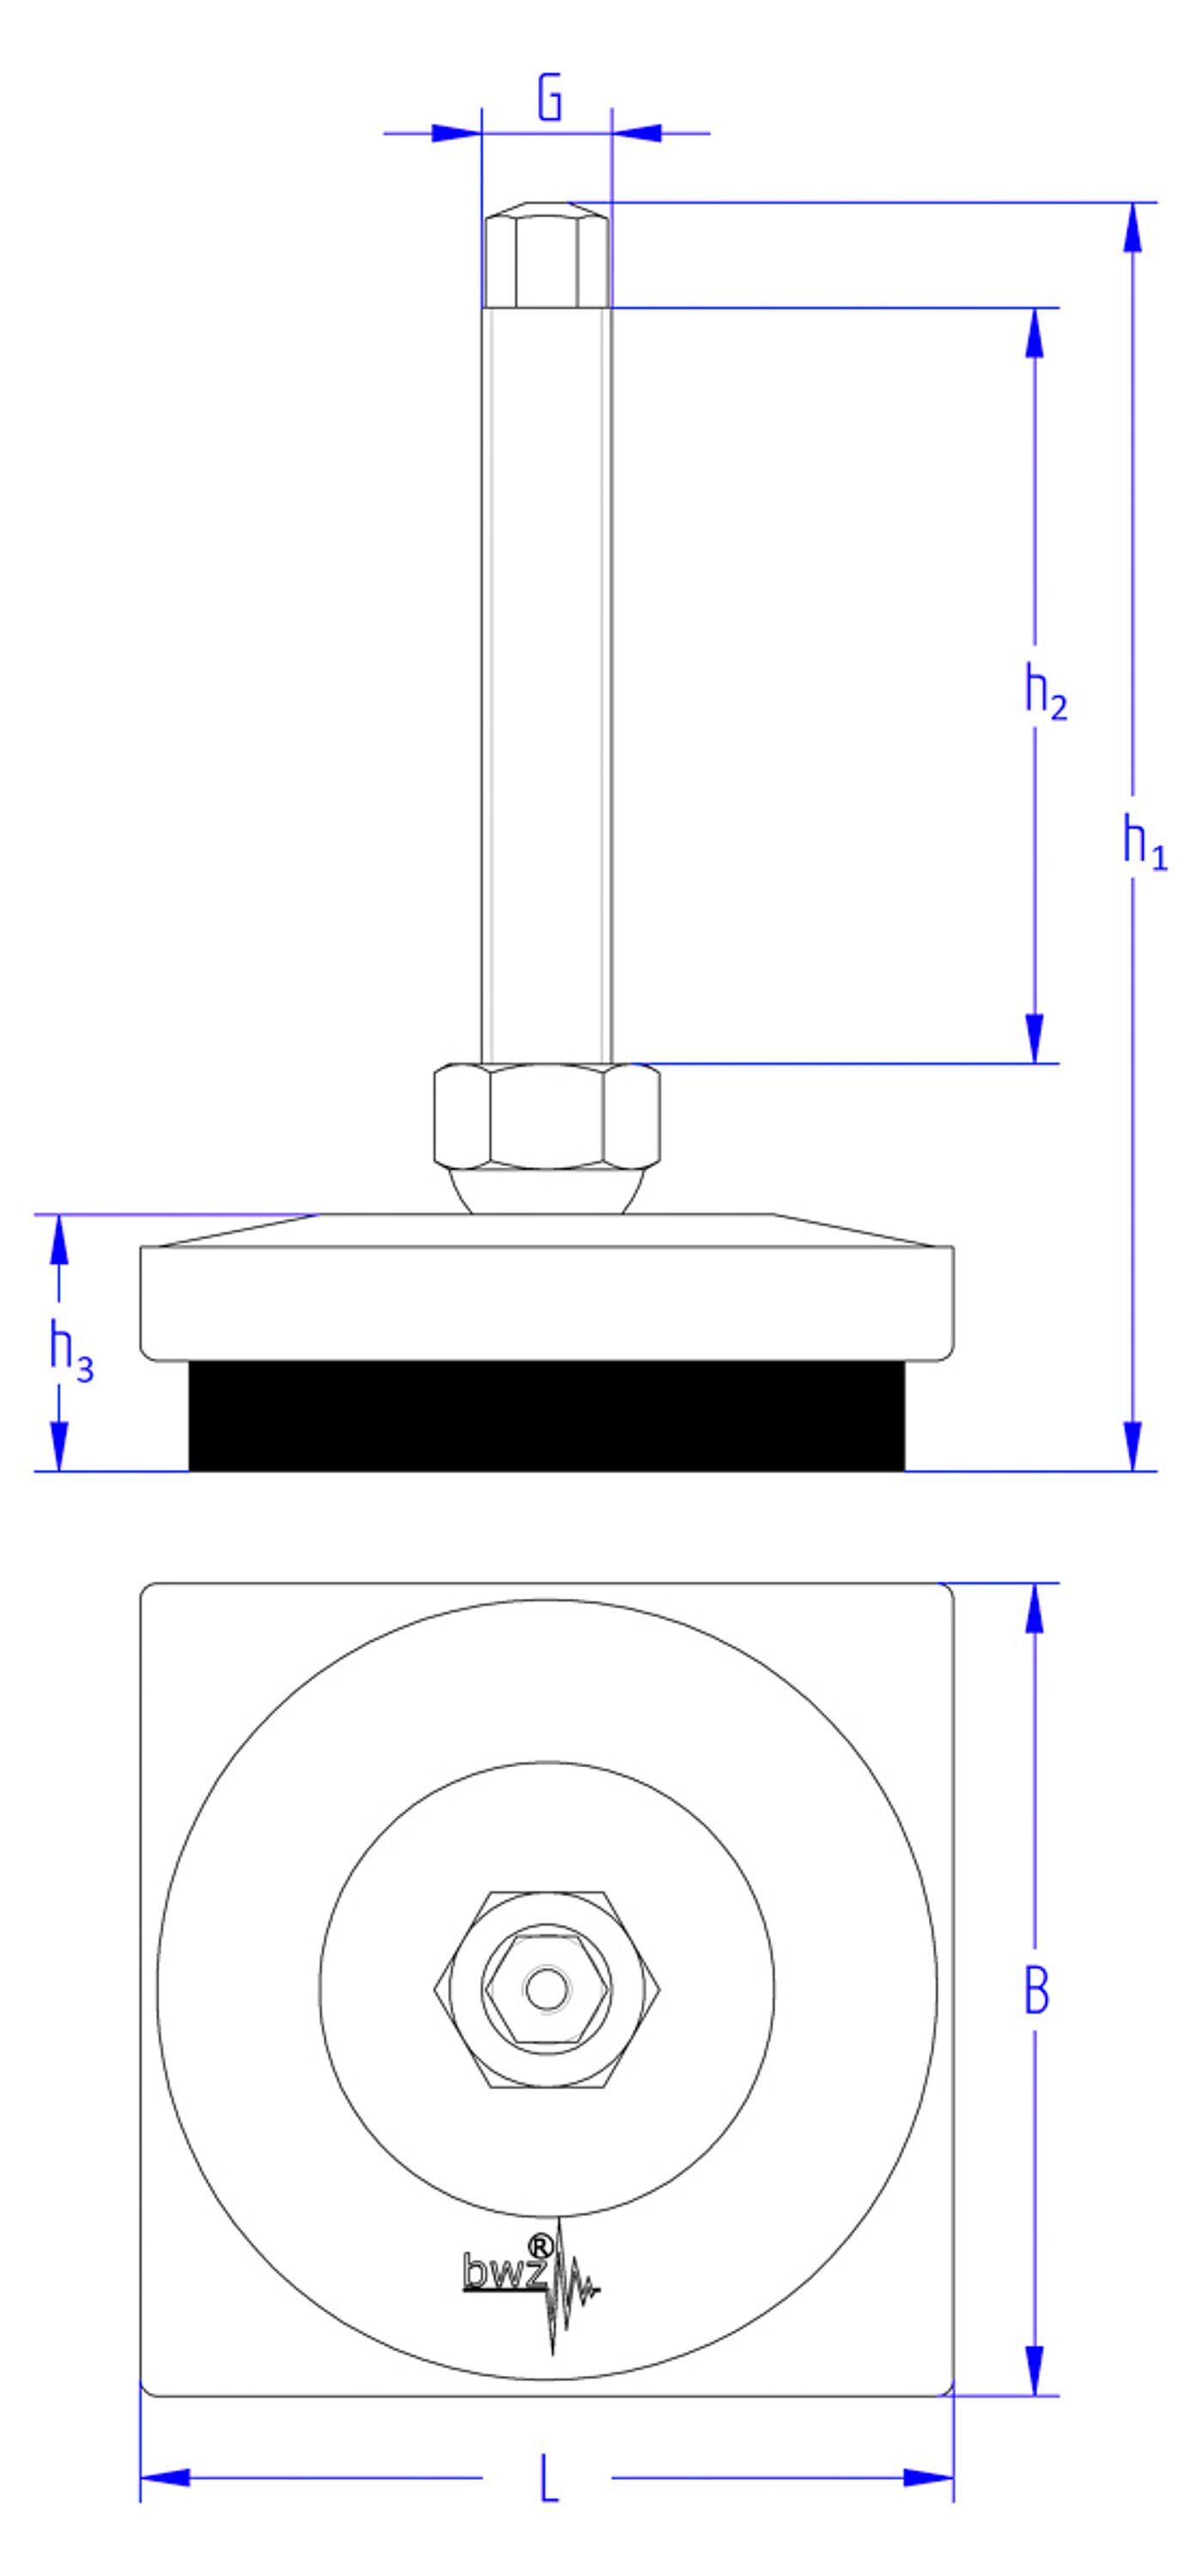 schematic drawing of a square levelling element made of cast iron, with a pendulum-action levelling screw with a hexagonal spanner flat at the top end, placed in a hexagonal cap nut sitting on top of the cast iron corpus, with the corpus and cap nut tightly connected to each other against falling apart, and elastomer for vibration damping at the bottom, in the side view and the view from the top